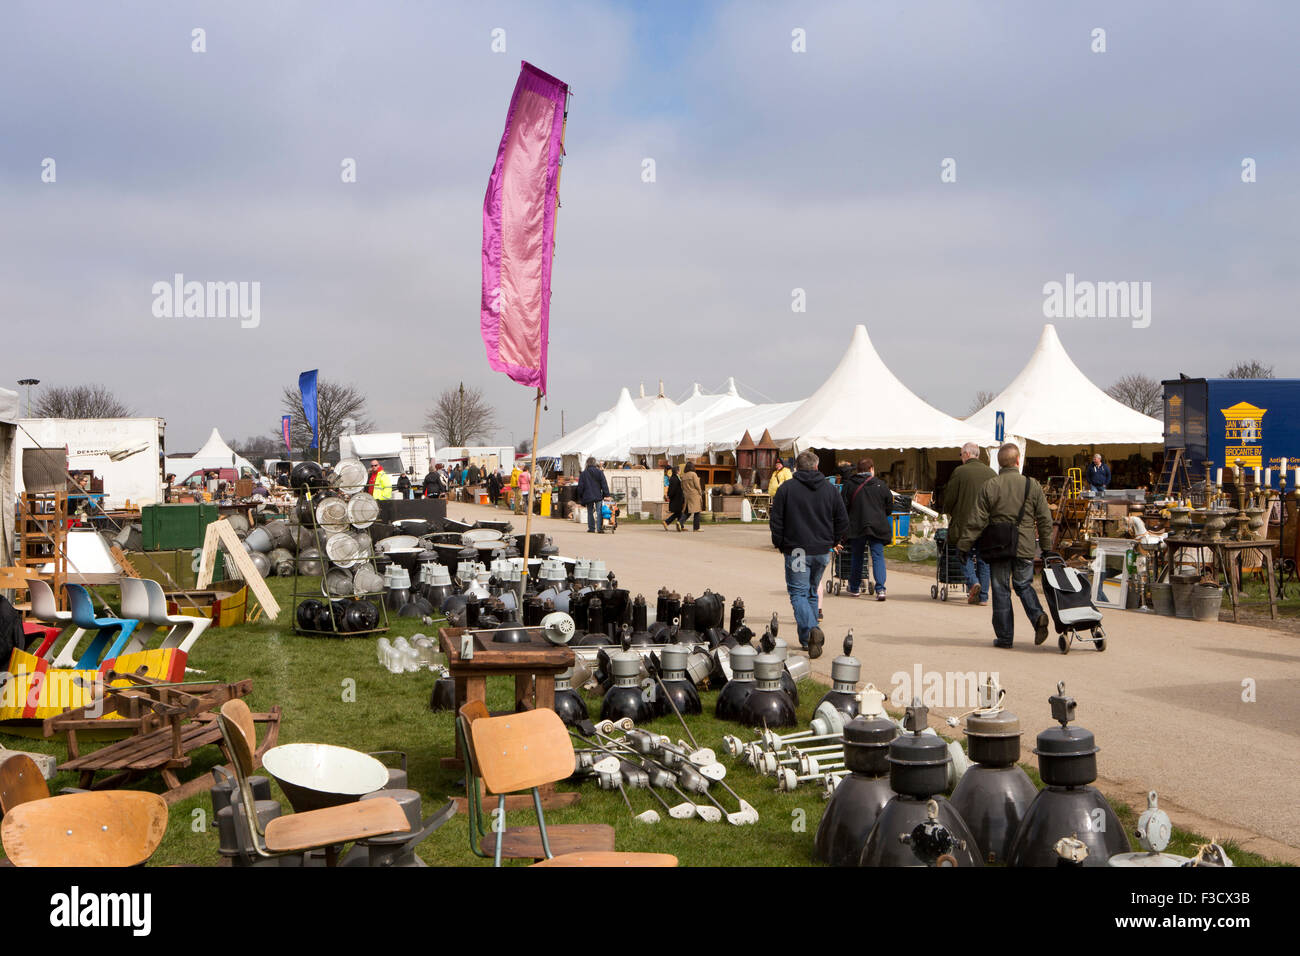 UK, England, Lincolnshire, Lincoln, Antiques Fair, stall selling reclaimed industrial lighting Stock Photo